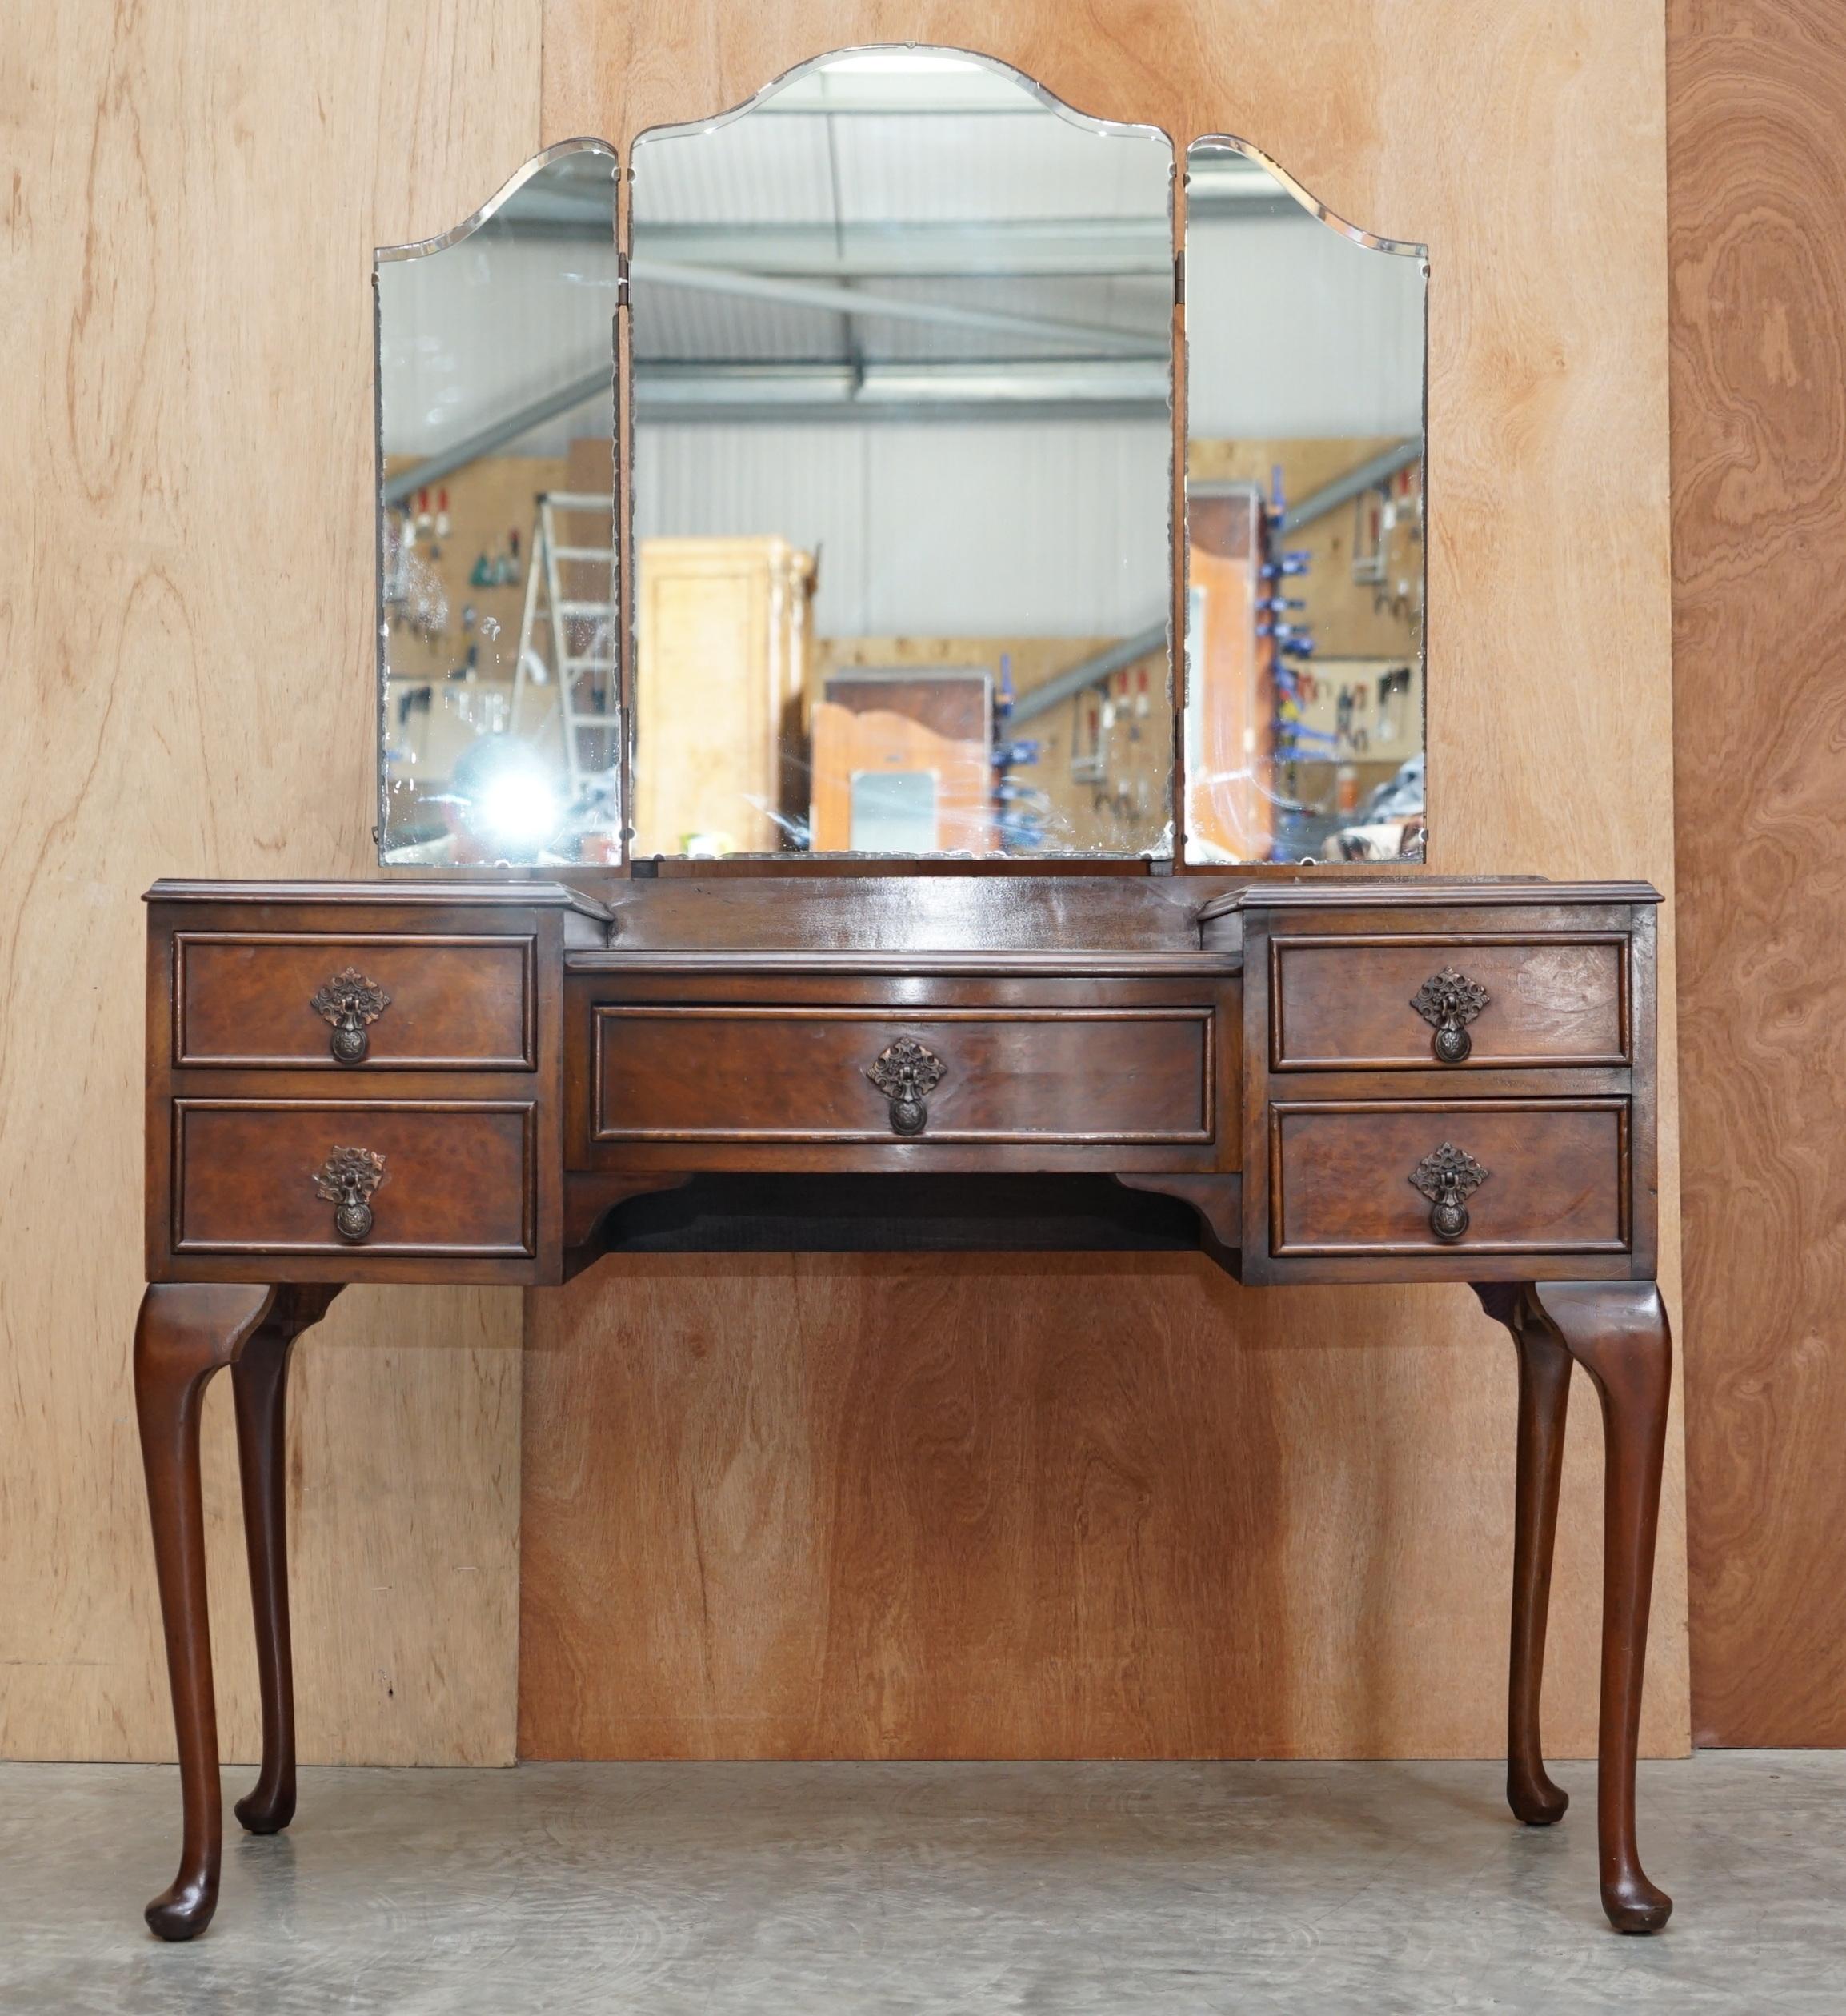 We are delighted to offer this lovely circa 1930’s large burr walnut Maple & Co dressing table which is part of a large suite

I have in total the dressing table with trifold mirrors, the very large double wardrobe, smaller shorter wardrobe with